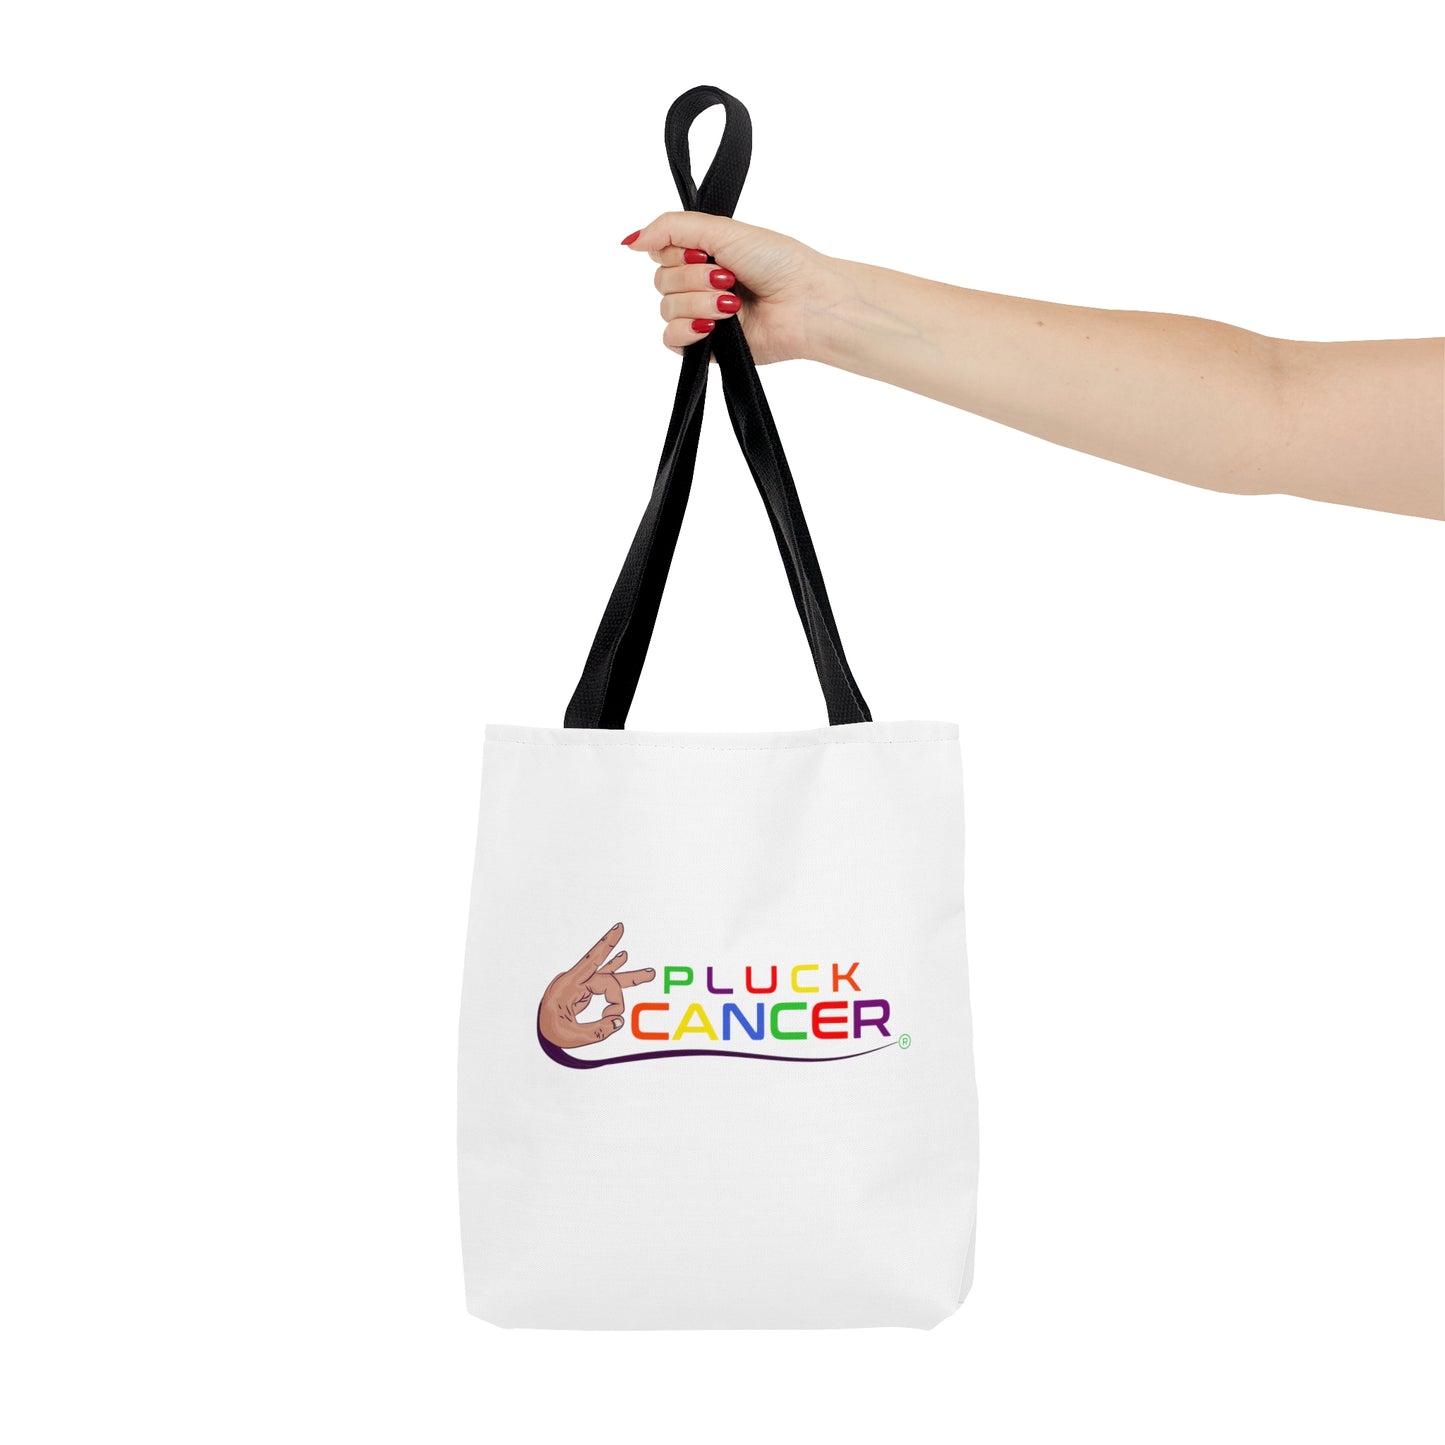 Tote Bag-"PLUCK CANCER"